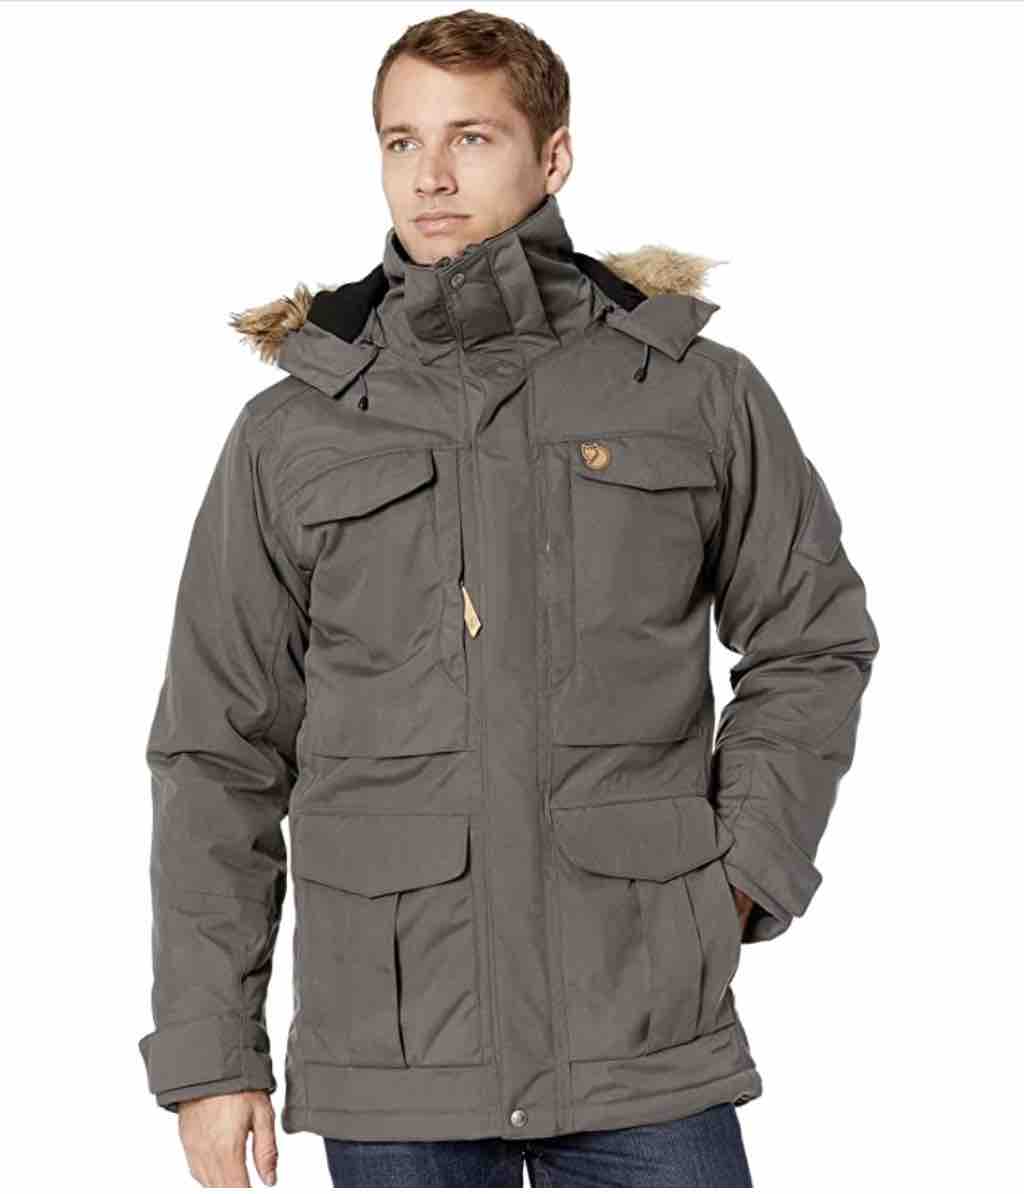 What Are The Warmest Jackets For Extreme Cold